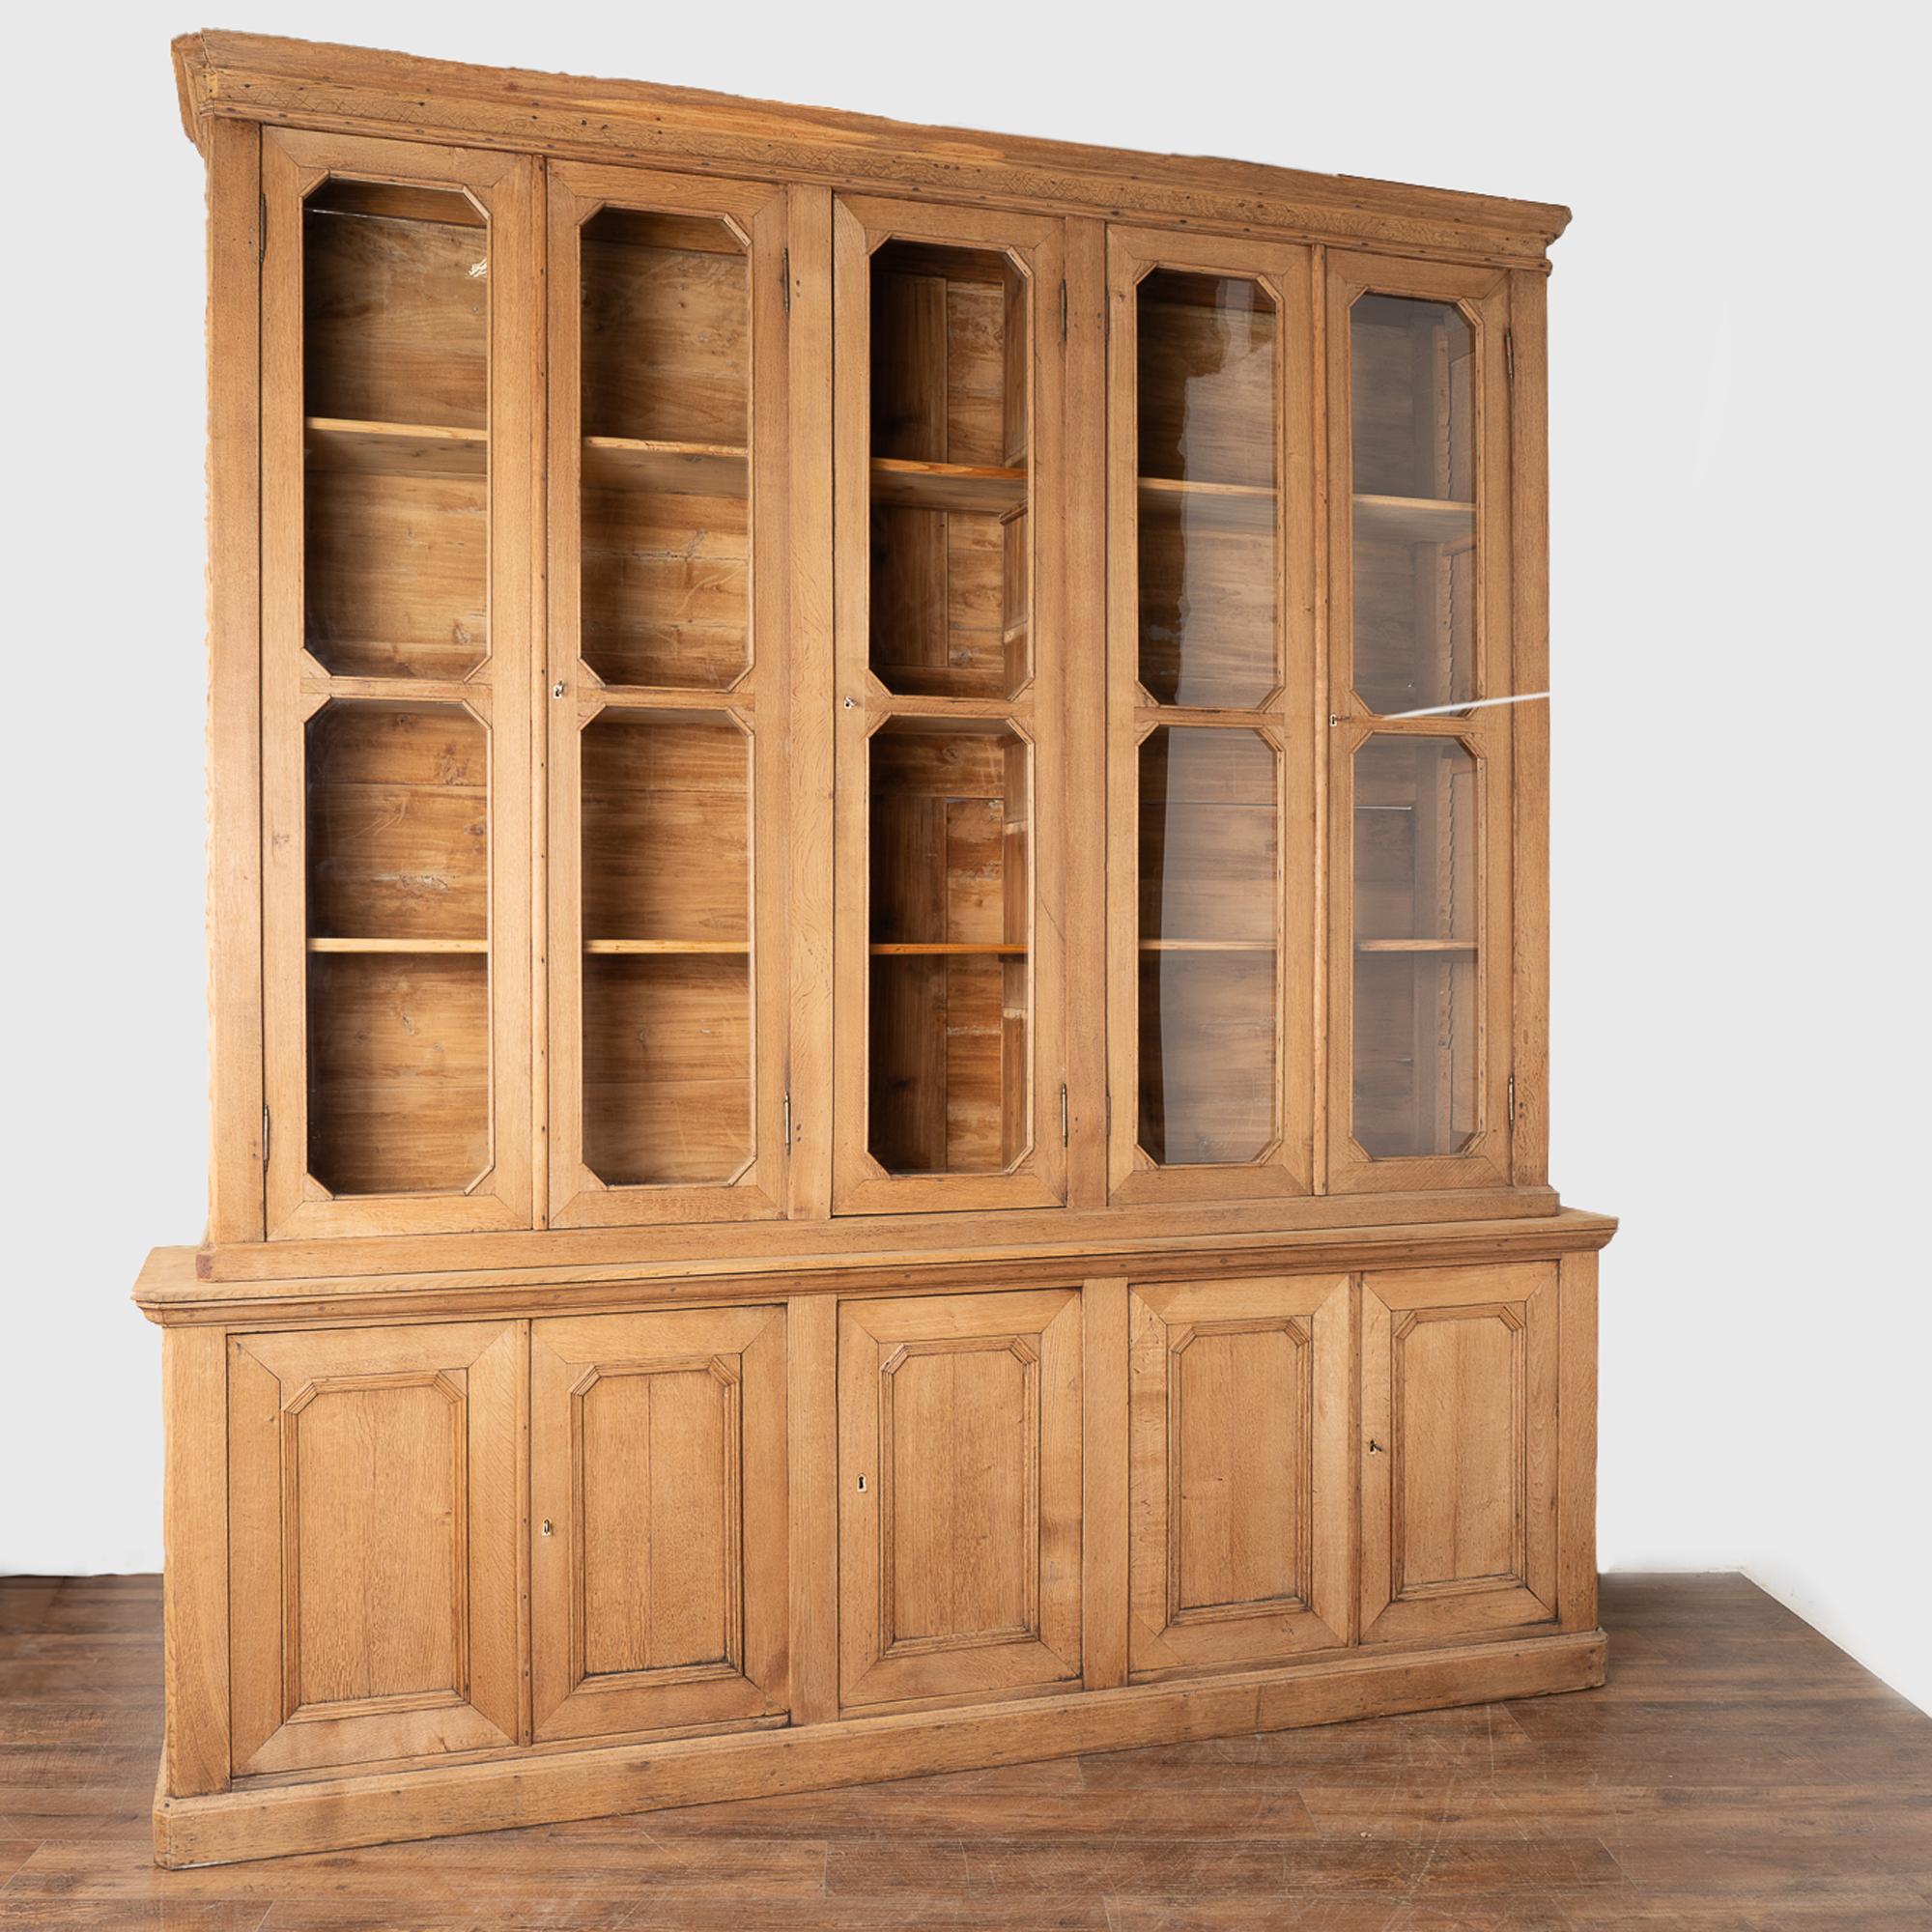 Impressive and statuesque, this extraordinary oak bookcase has five long upper glass cabinet doors and five panel cabinet doors below.
The French oak has been bleached creating a fresh, lighter finish for today's modern home.
This large display